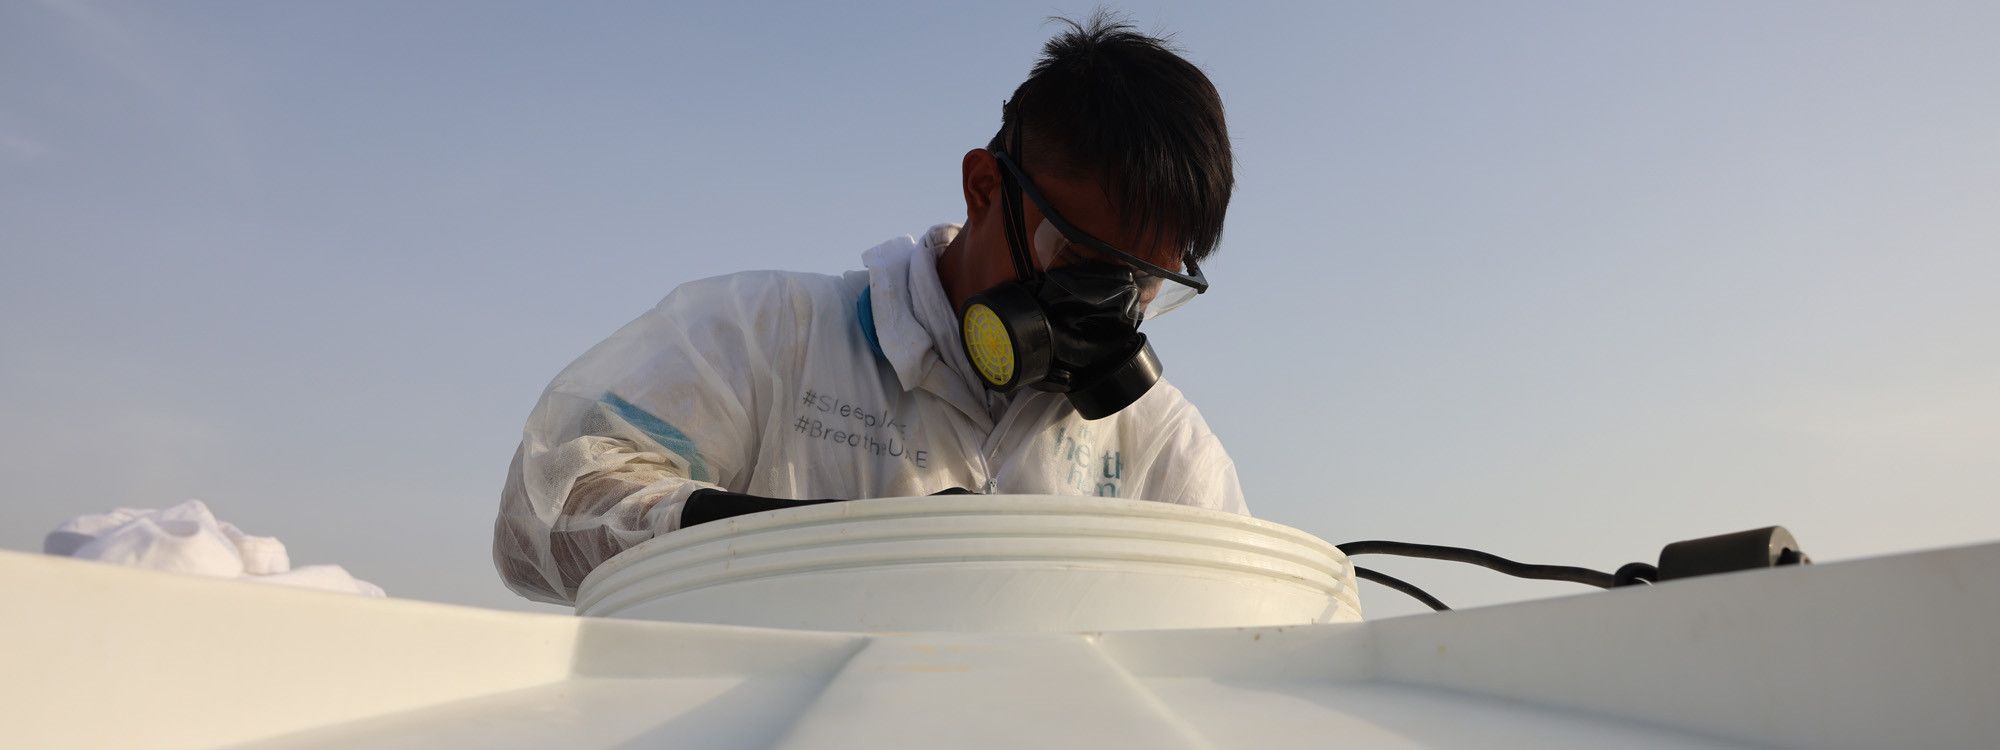 water tank cleaning services dubai, clean water tank, disinfection of water